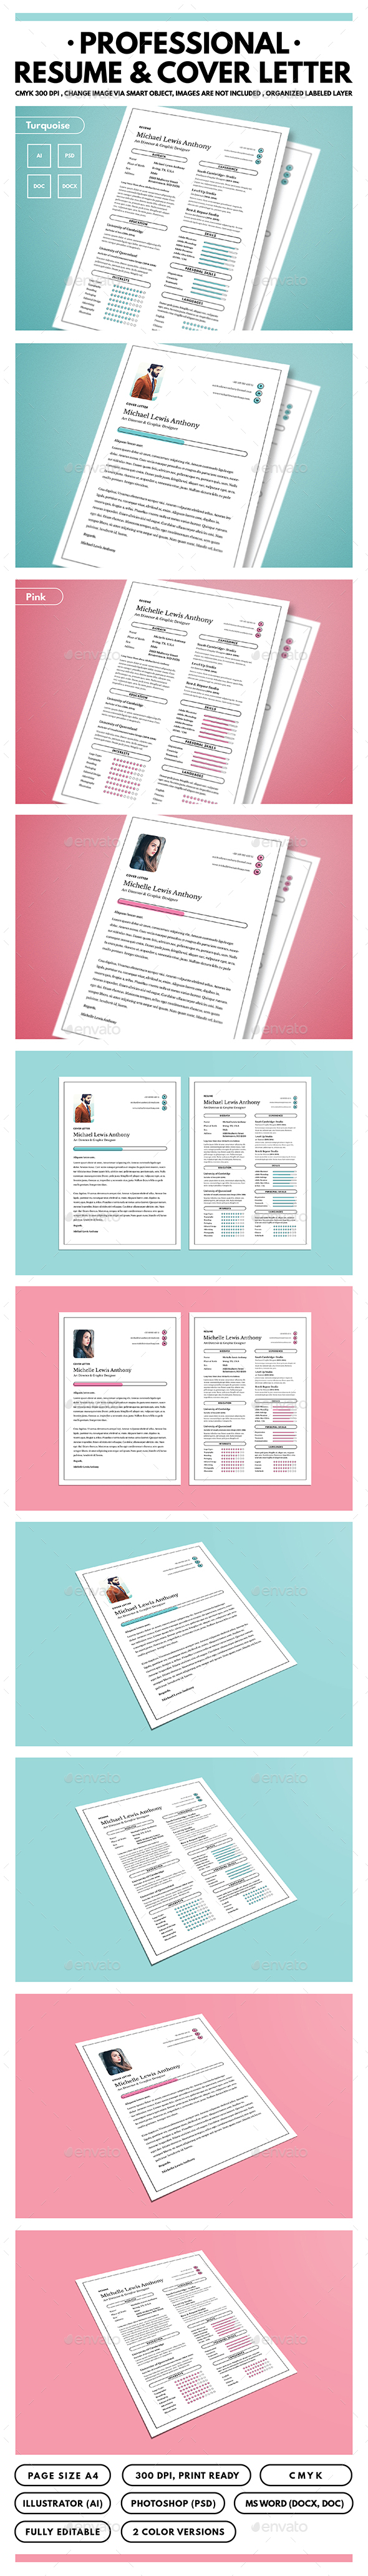 Professional Resume & Cover Letter